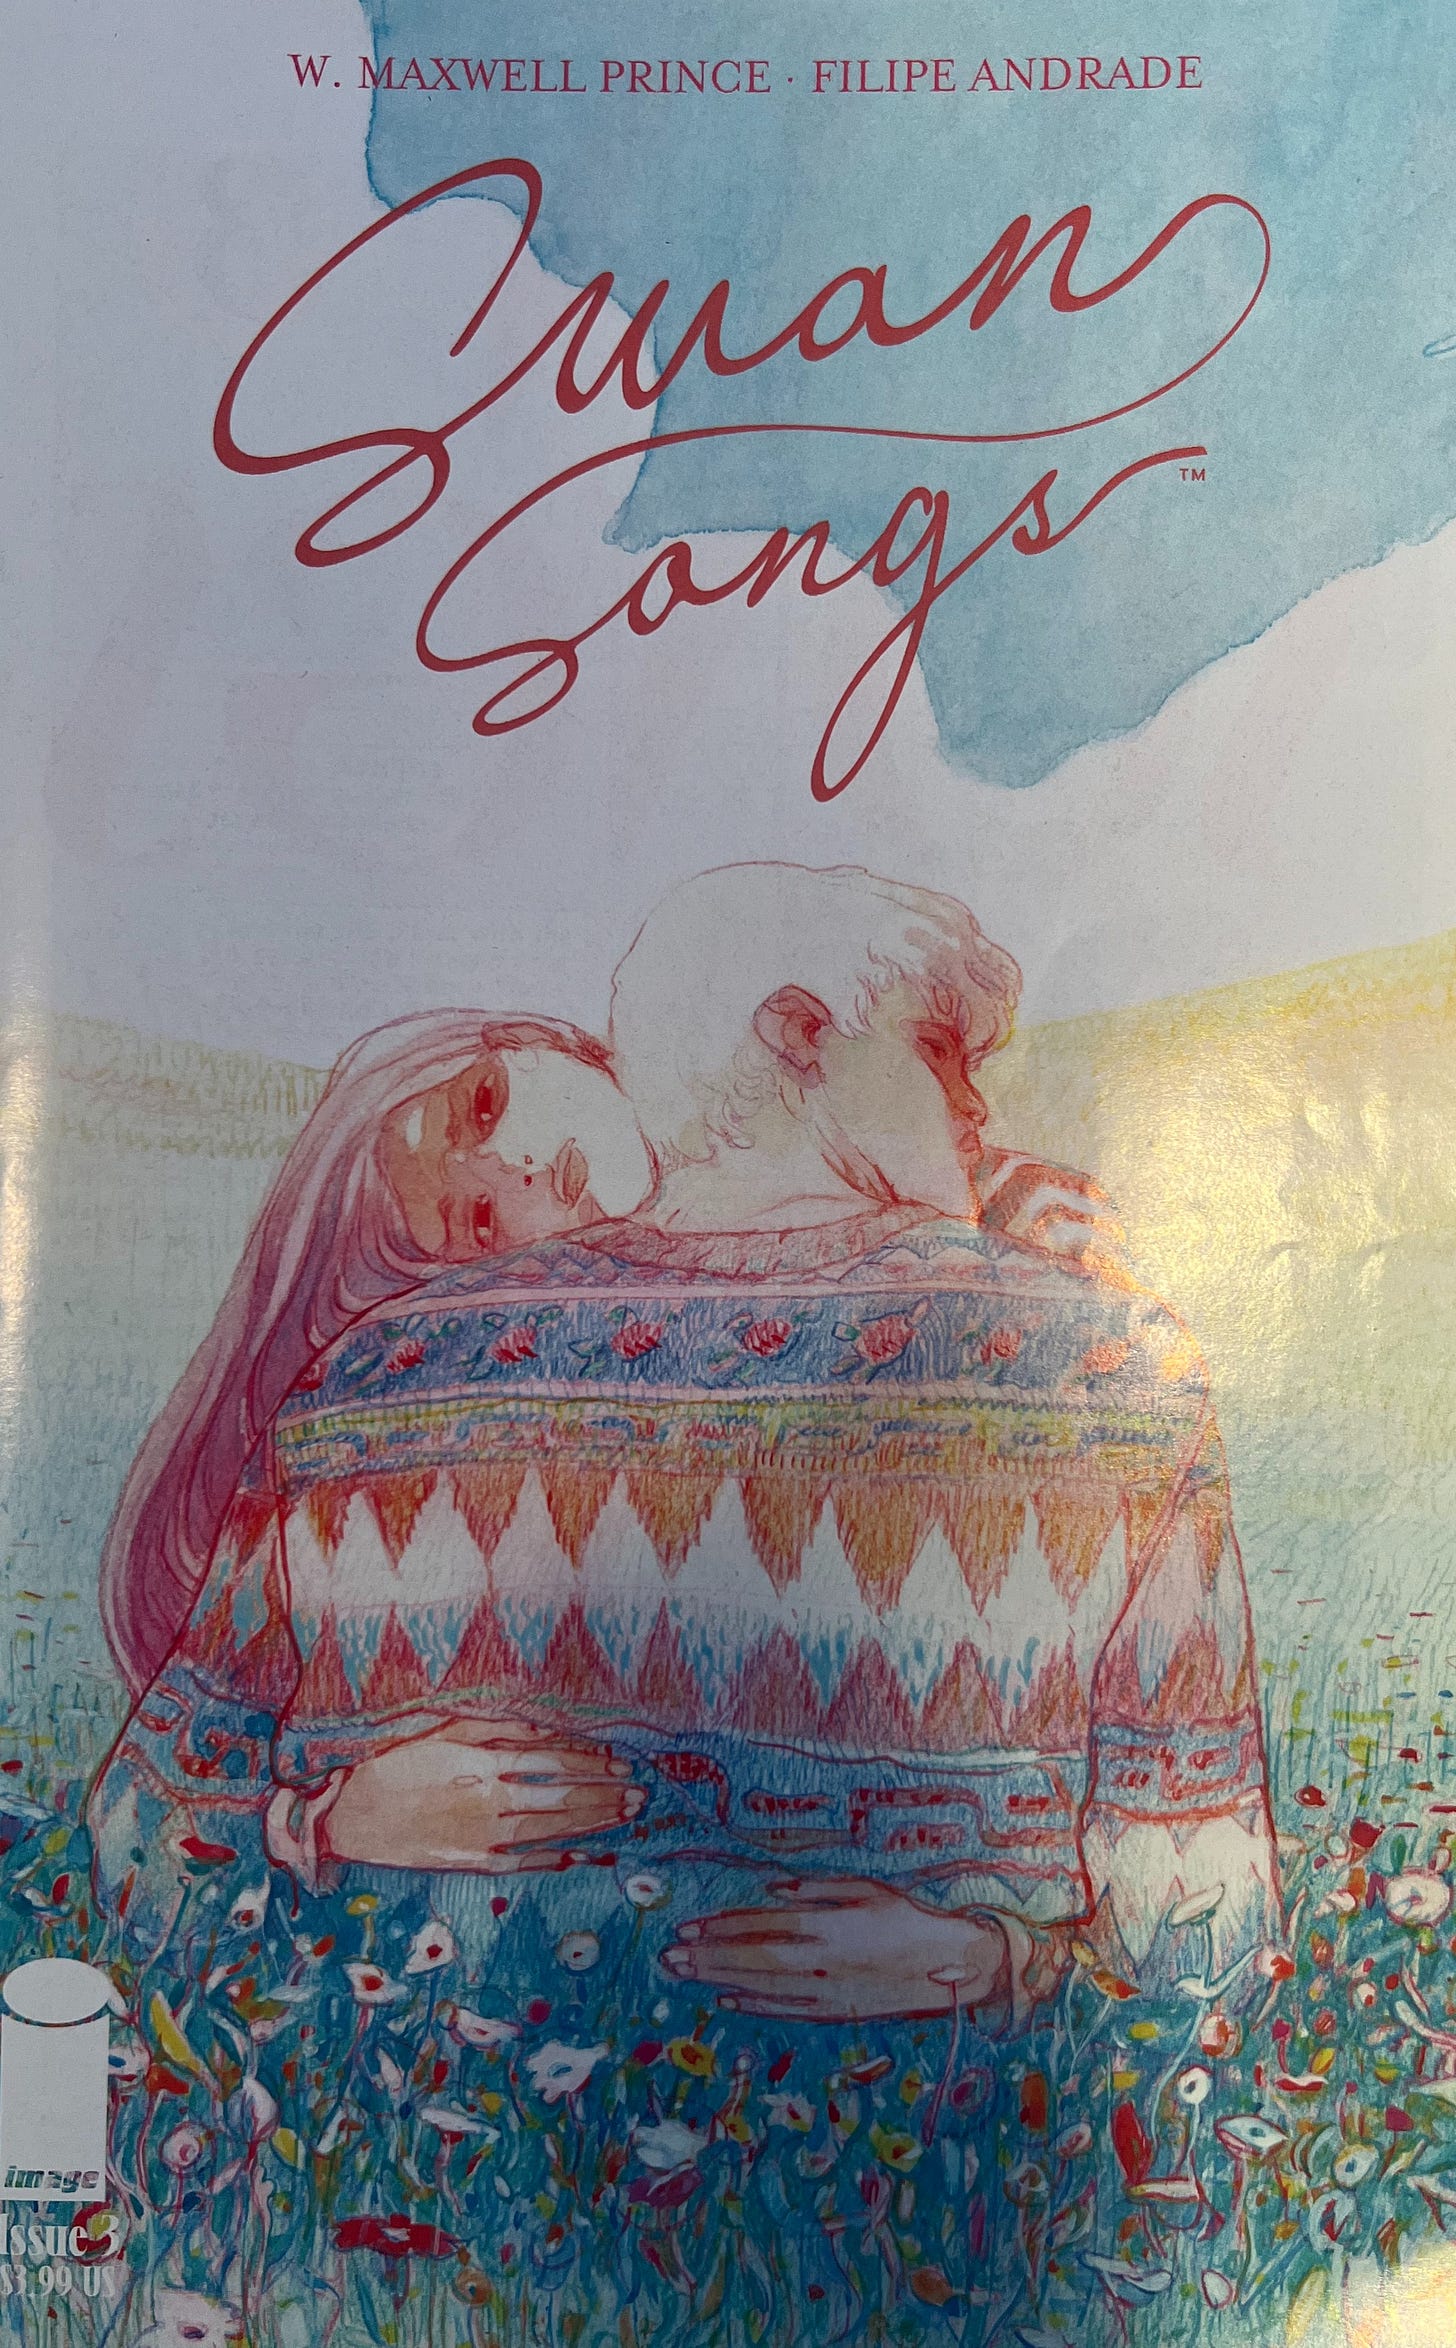 Swan Song #3. Cover features a colored pencil portrait of a man and woman embracing in front of an empty plain and blue skies.